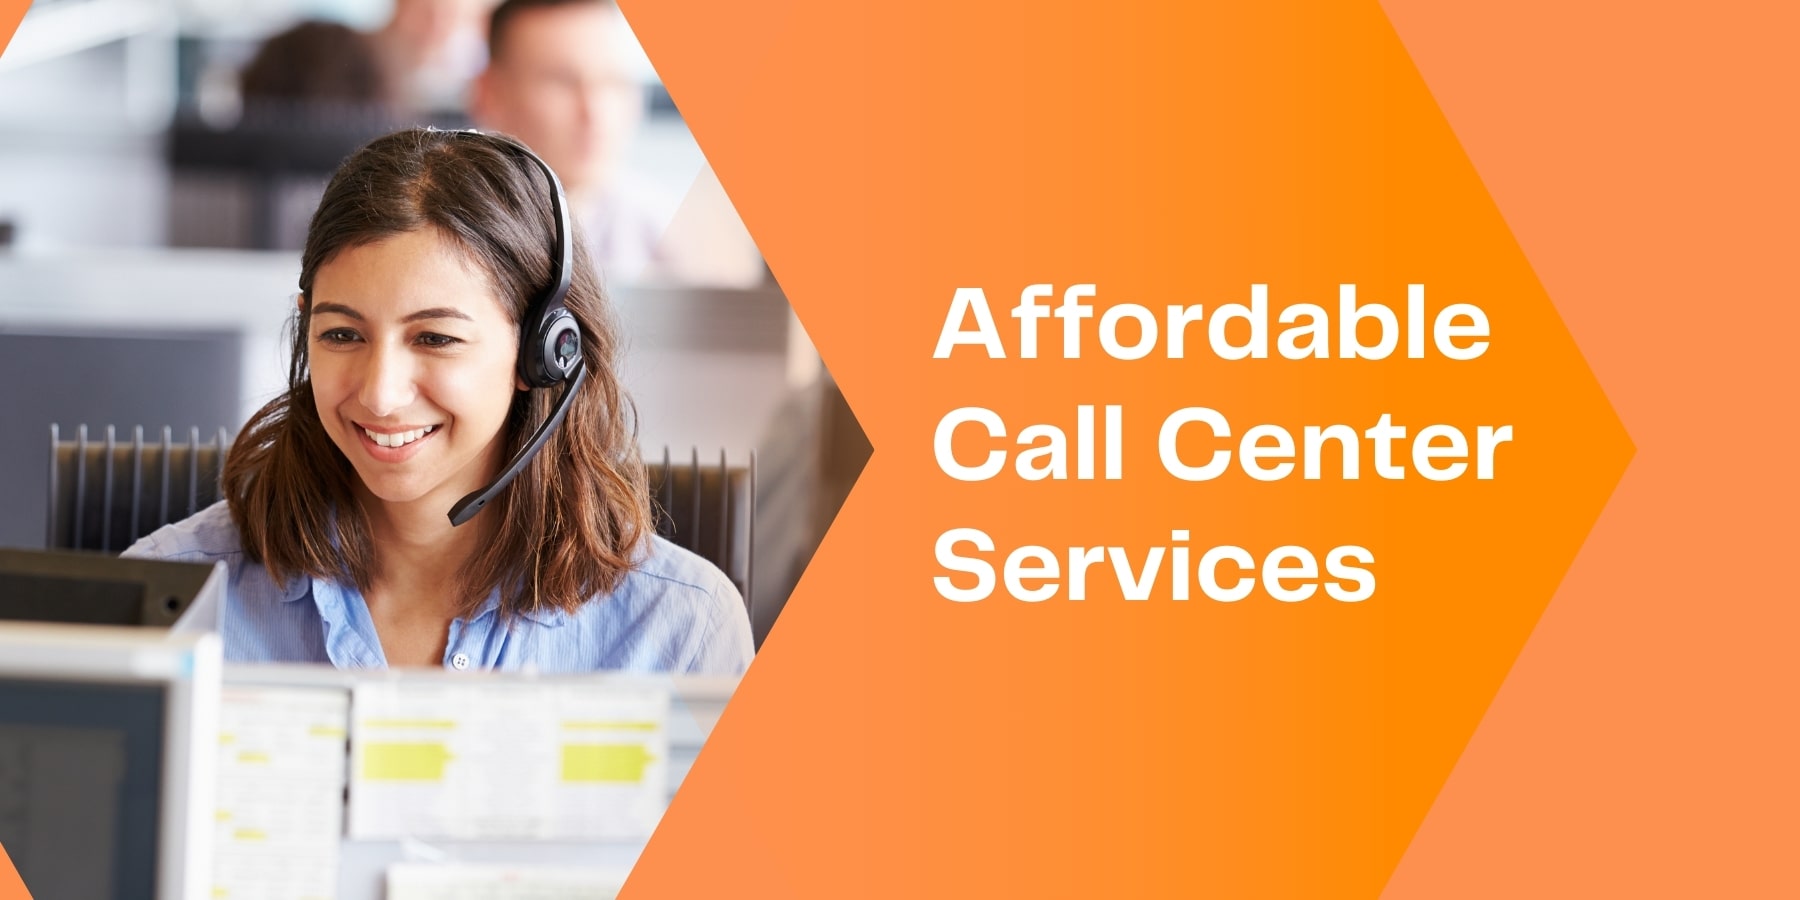 Affordable Call Center Services